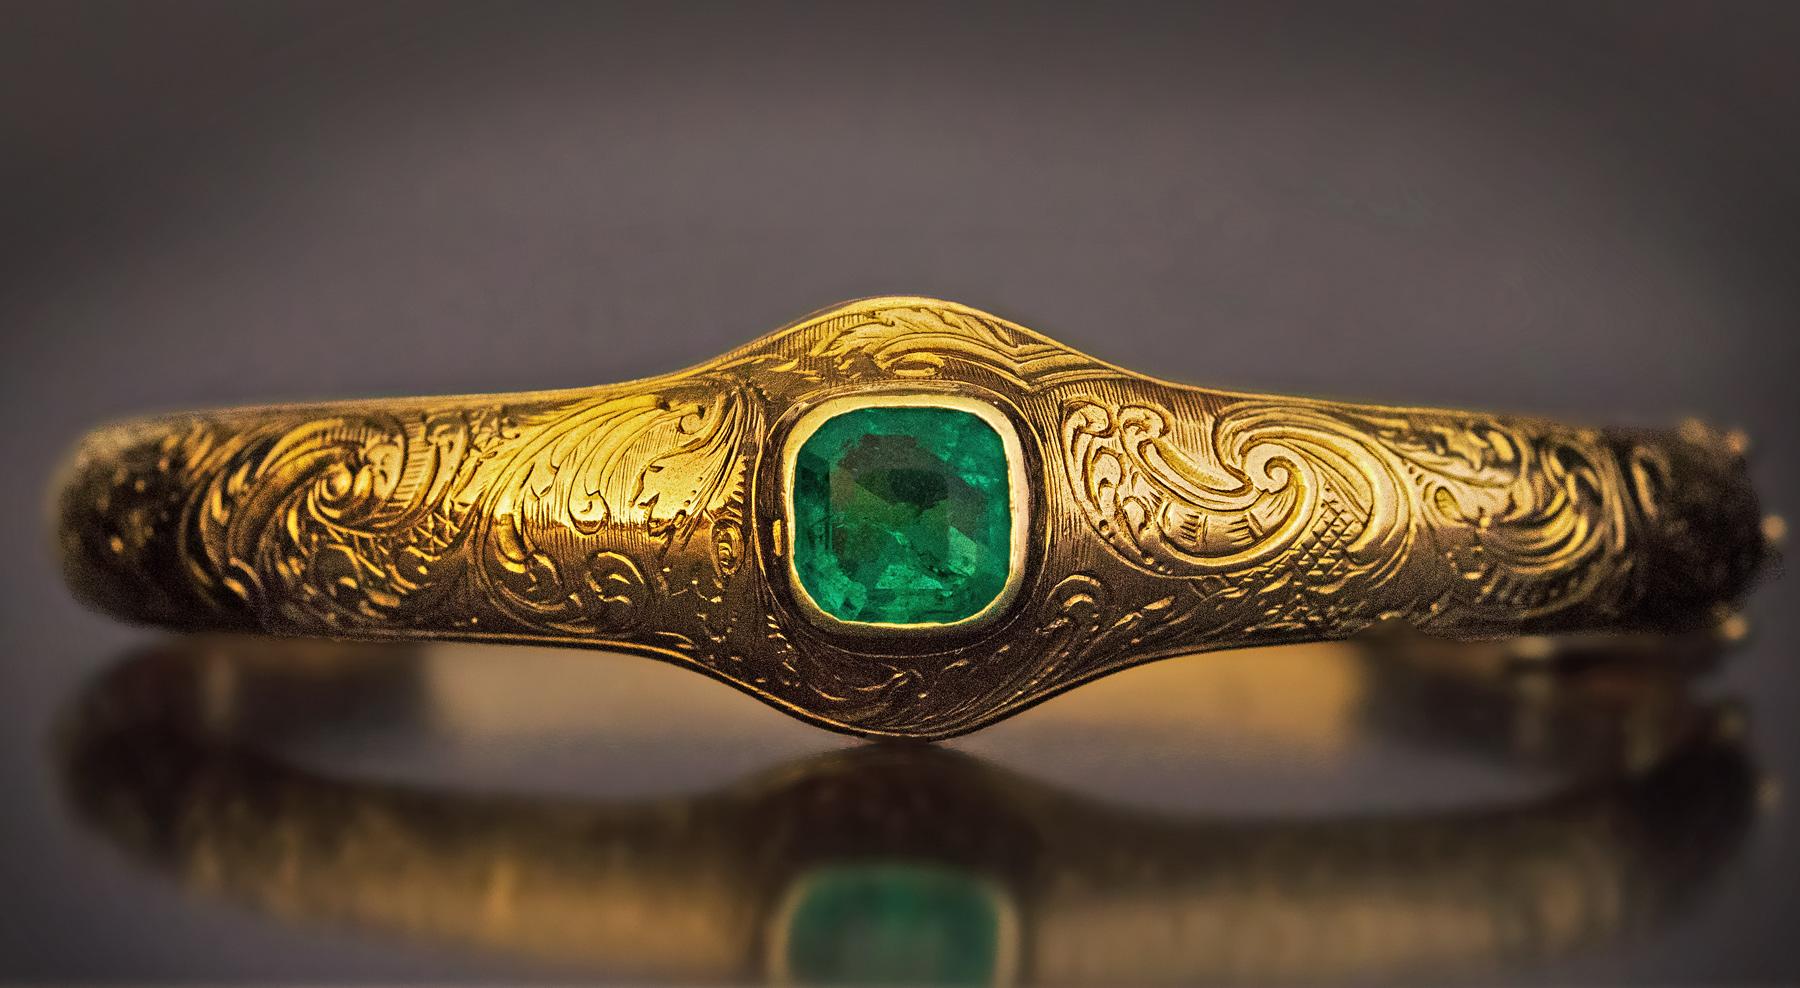 Circa 1890

This antique 14K gold hollow bangle bracelet is finely hand-engraved with scrolling foliage in the Neo-Rococo style. The bracelet is bezel set with an emerald cut natural emerald of a saturated bluish green color. The emerald (likely of